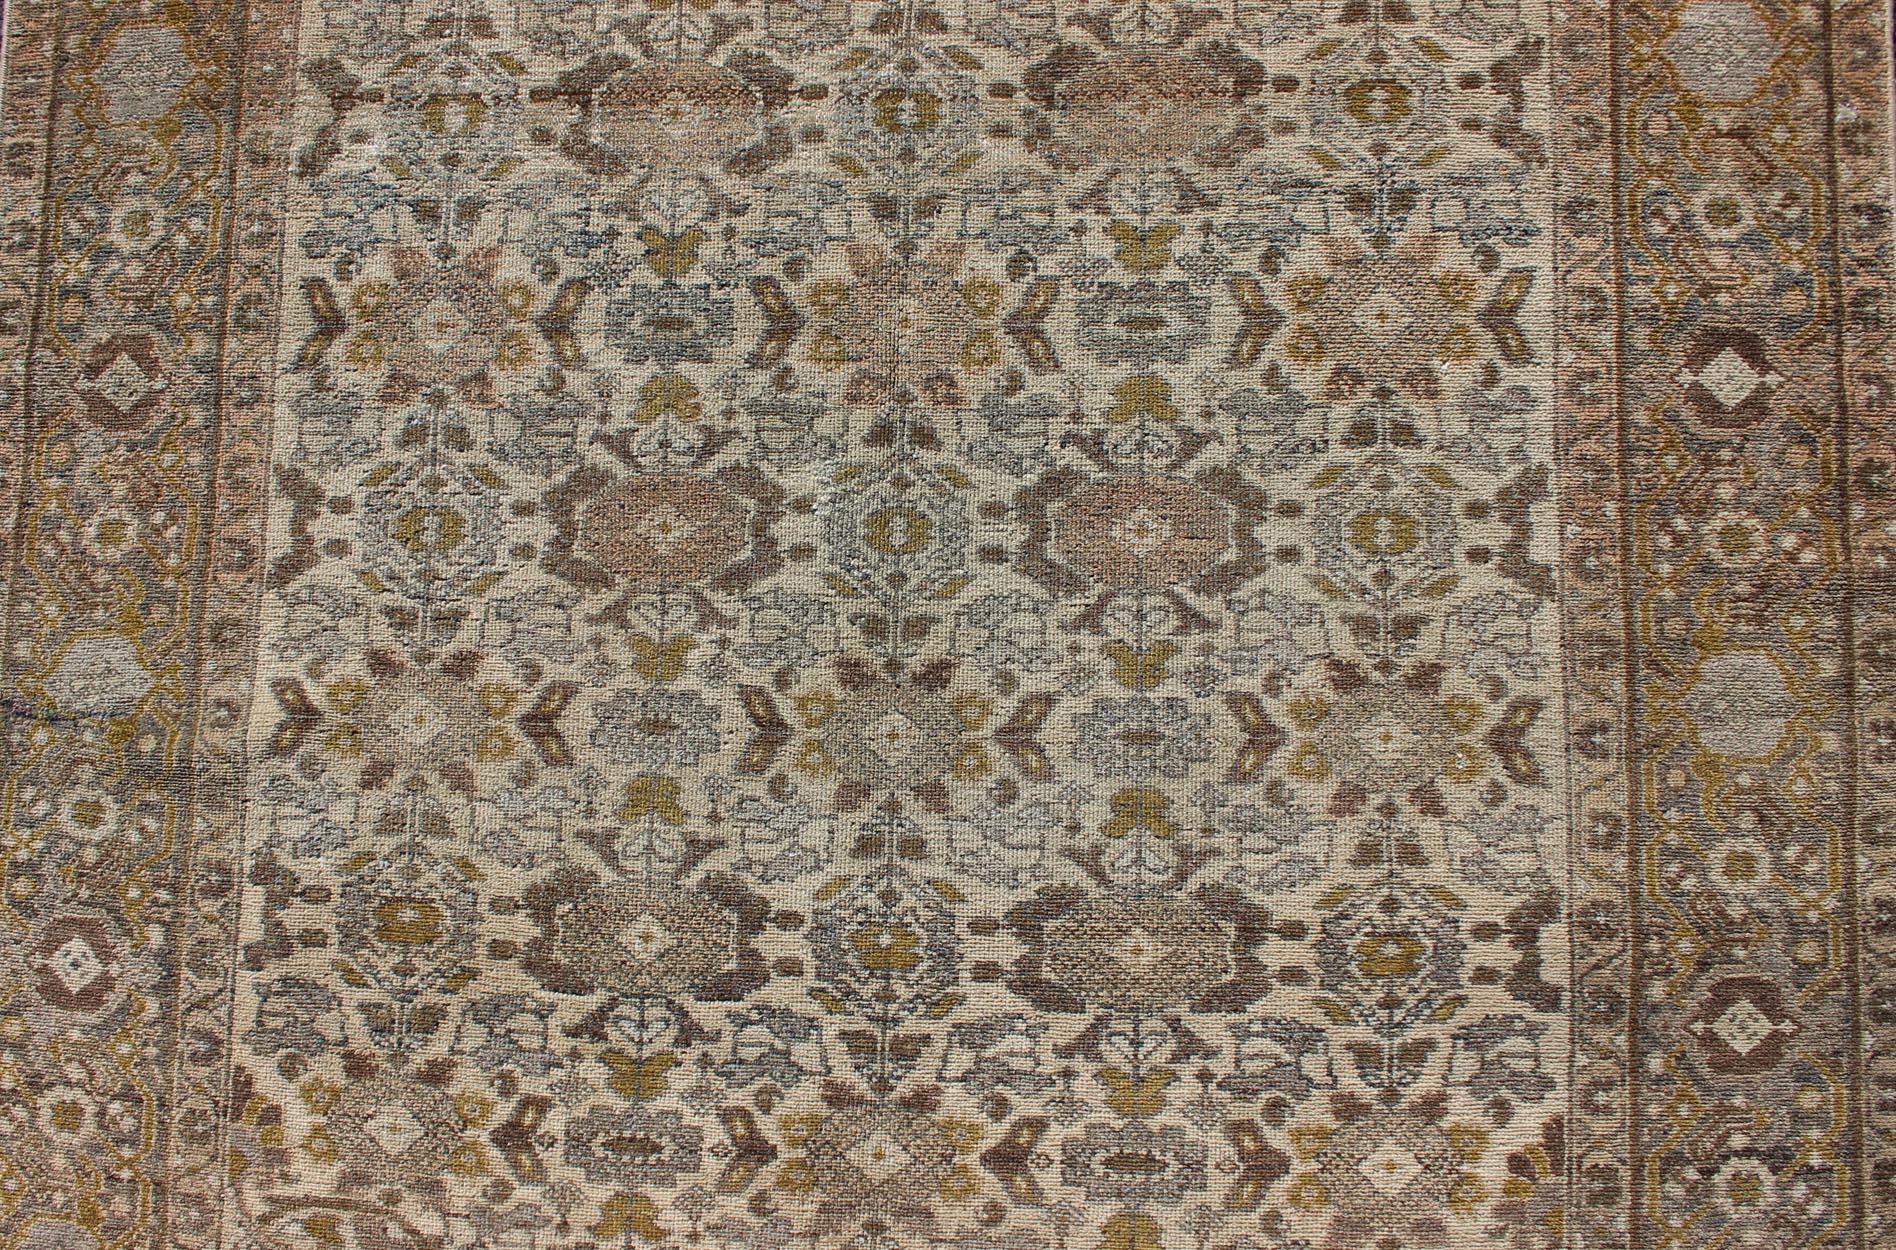 Antique Persian Malayer Rug with All-Over Boteh Design in Earth Tones 5